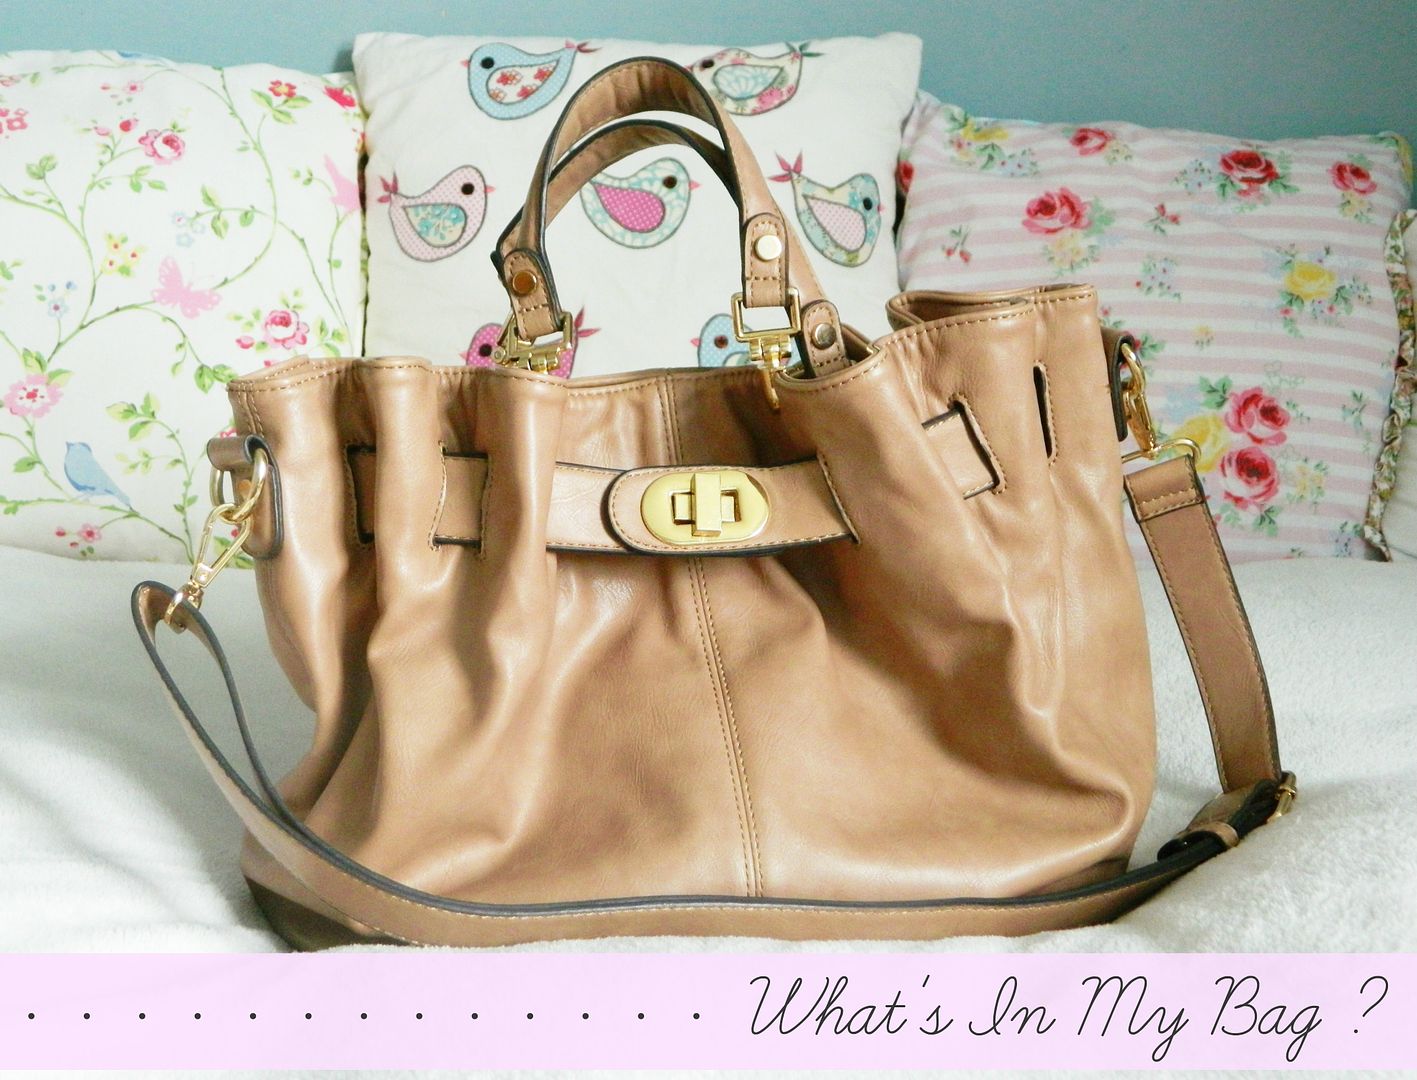 Whats In My Bag Spring 2014 Belle-amie UK Beauty Fashion Lifestyle Blog